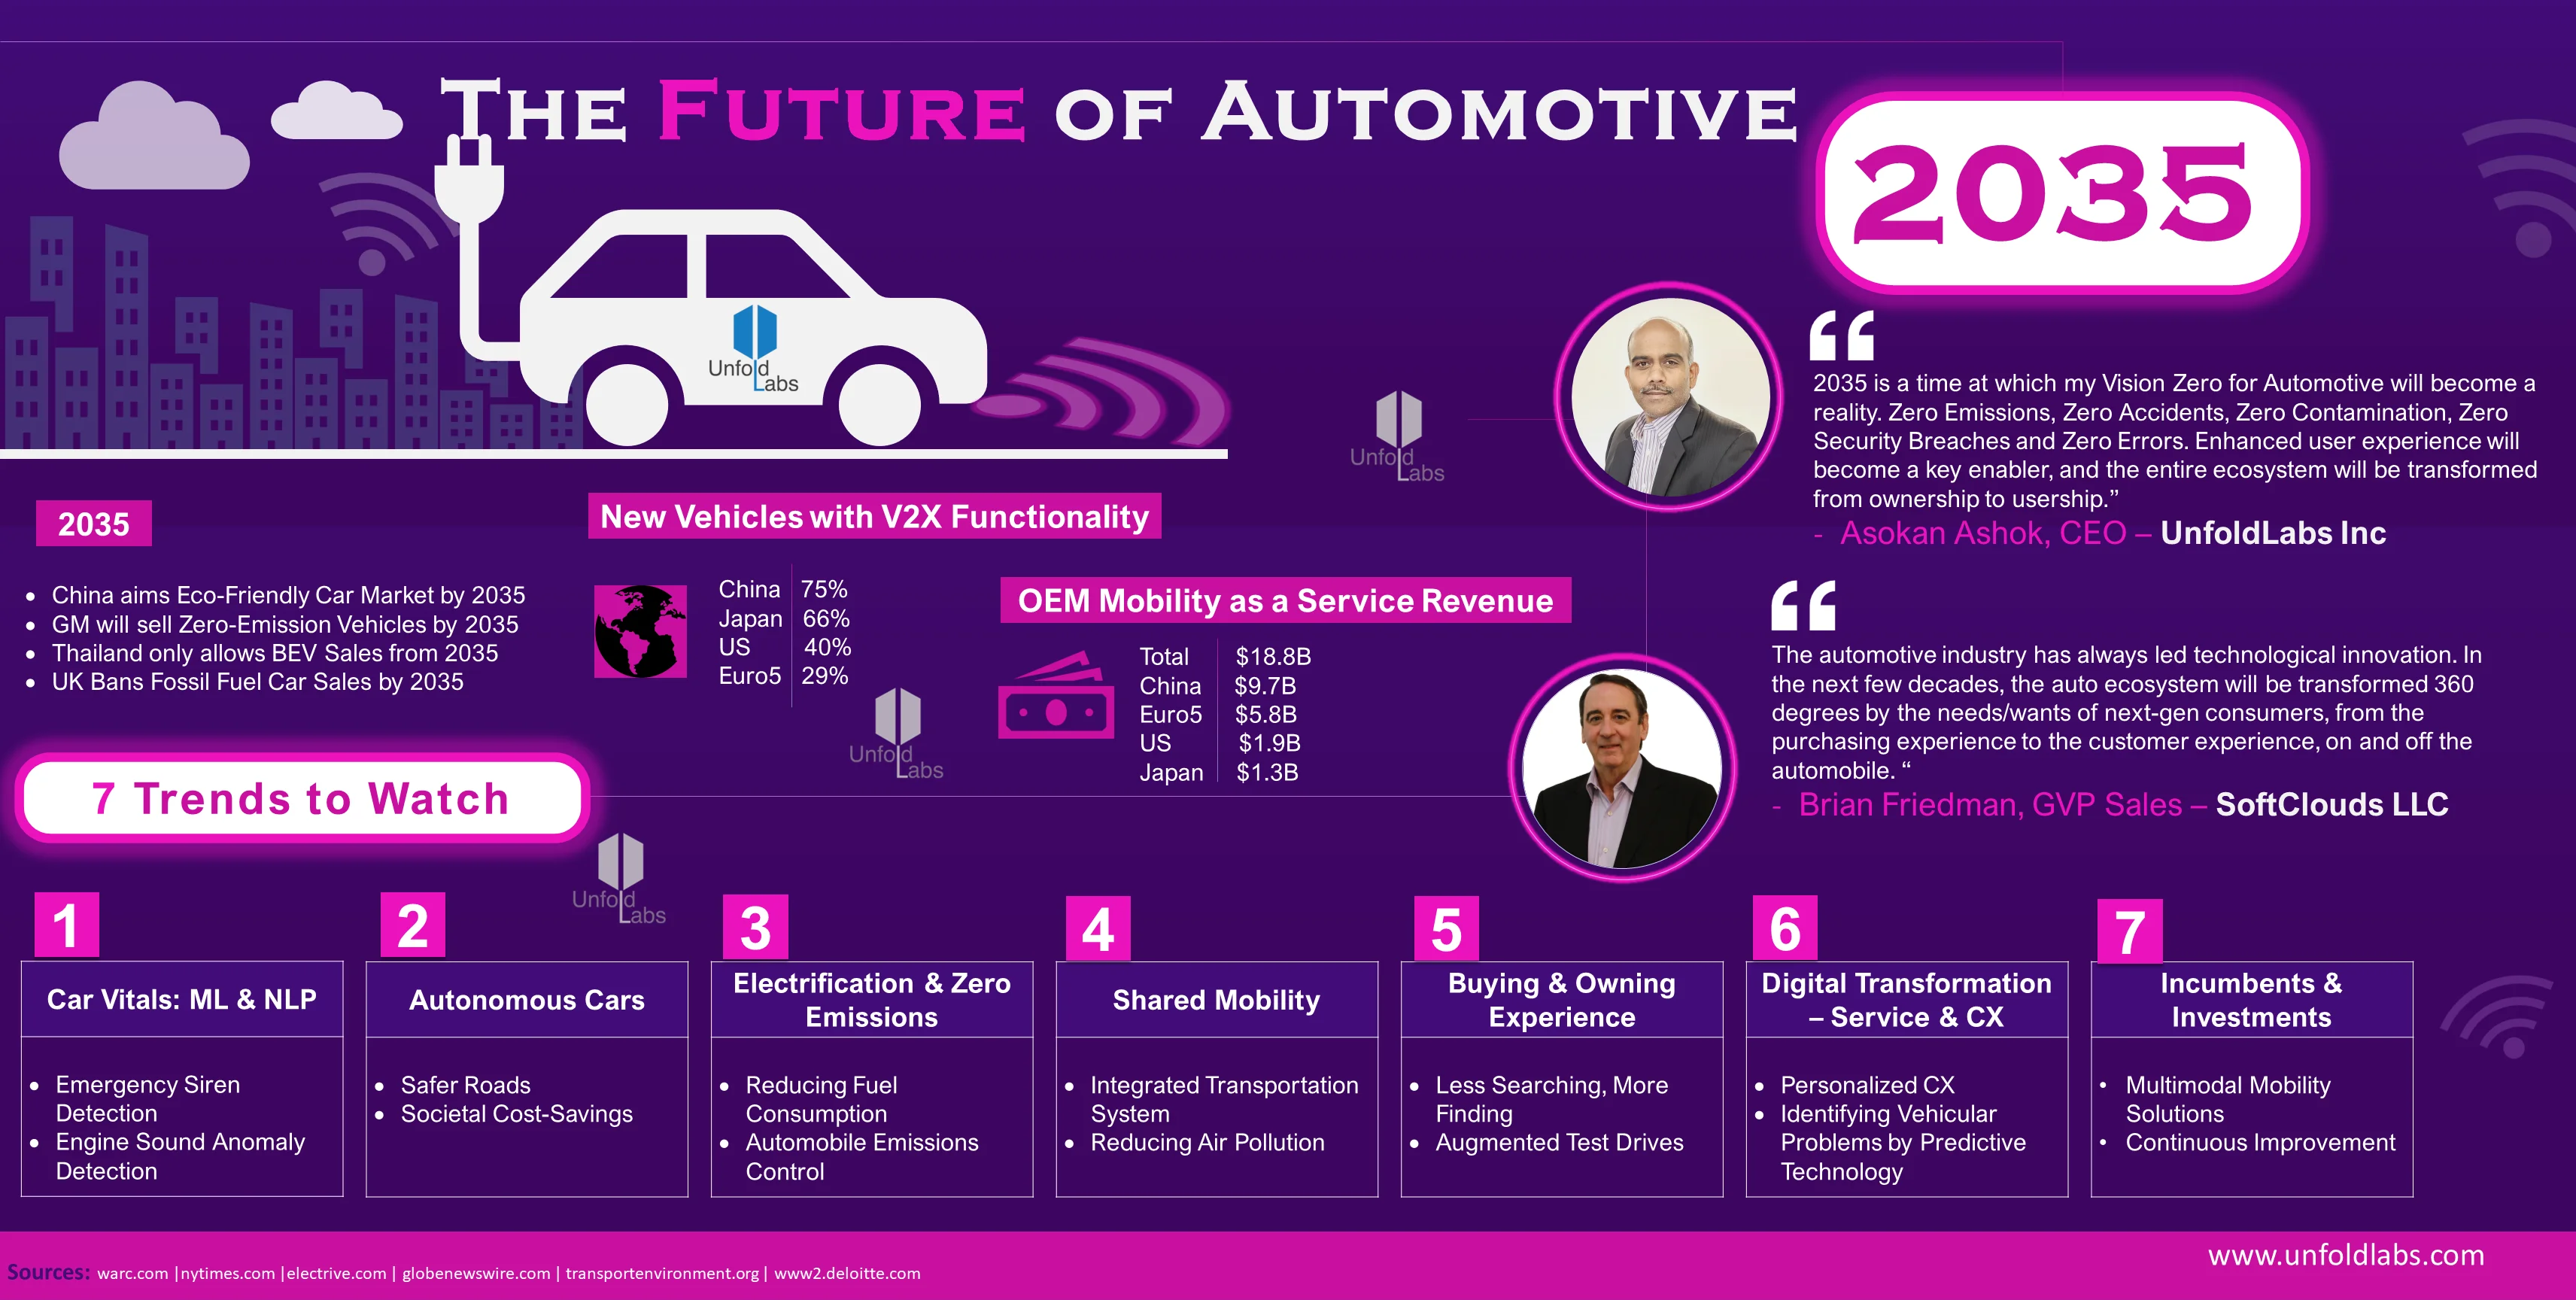 The Future of Automotive 2035 â€“ 7 Trends
										to Watch